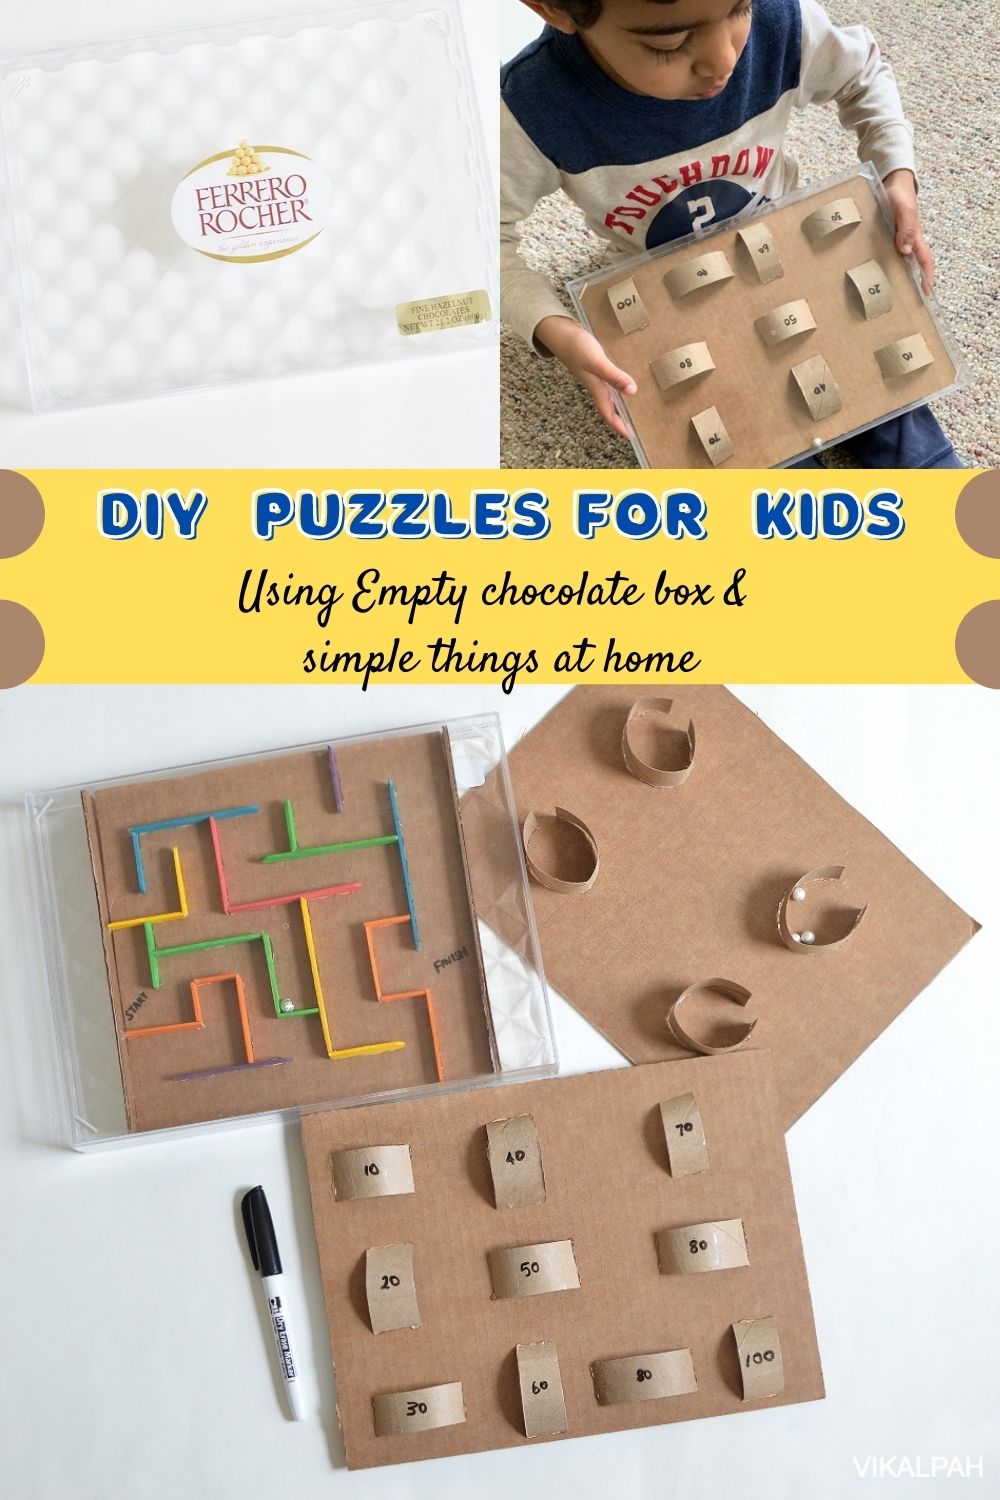 Vikalpah: DIY puzzles for kids with things at home using Ferrero Rocher  boxes